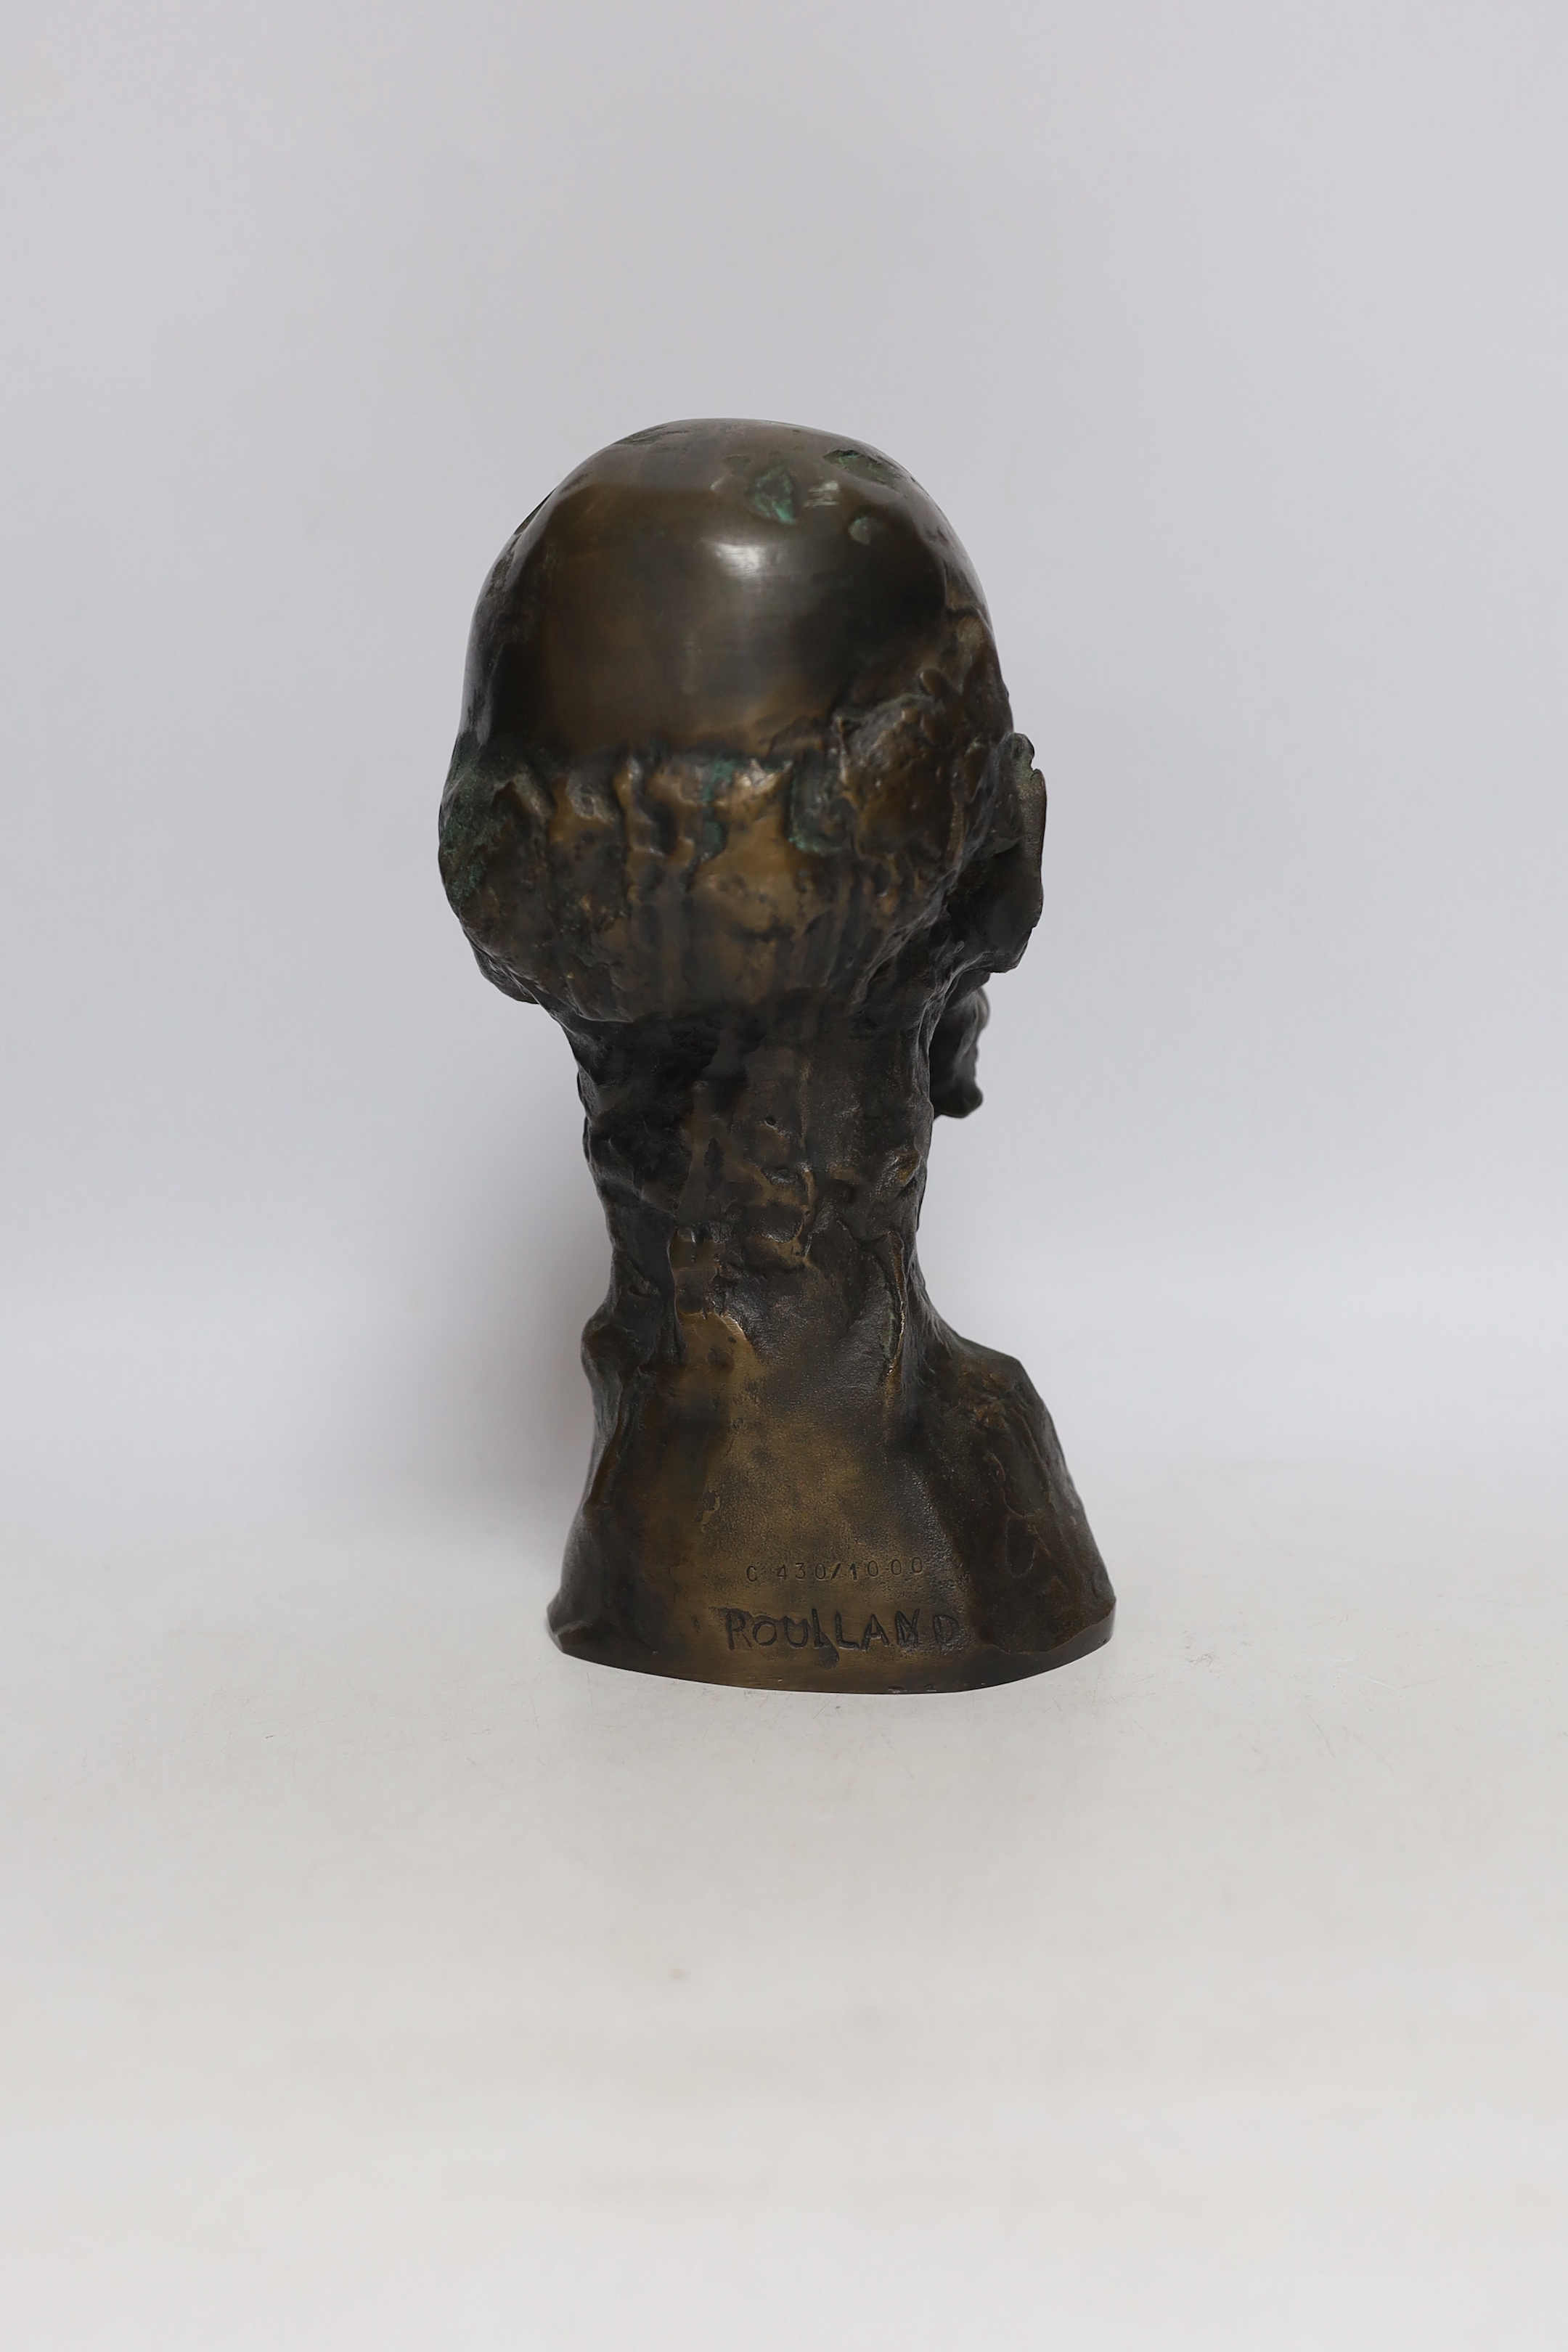 Jean Roulland (1931-2021), a bronze bust of Hippocrate, numbered 400/1000